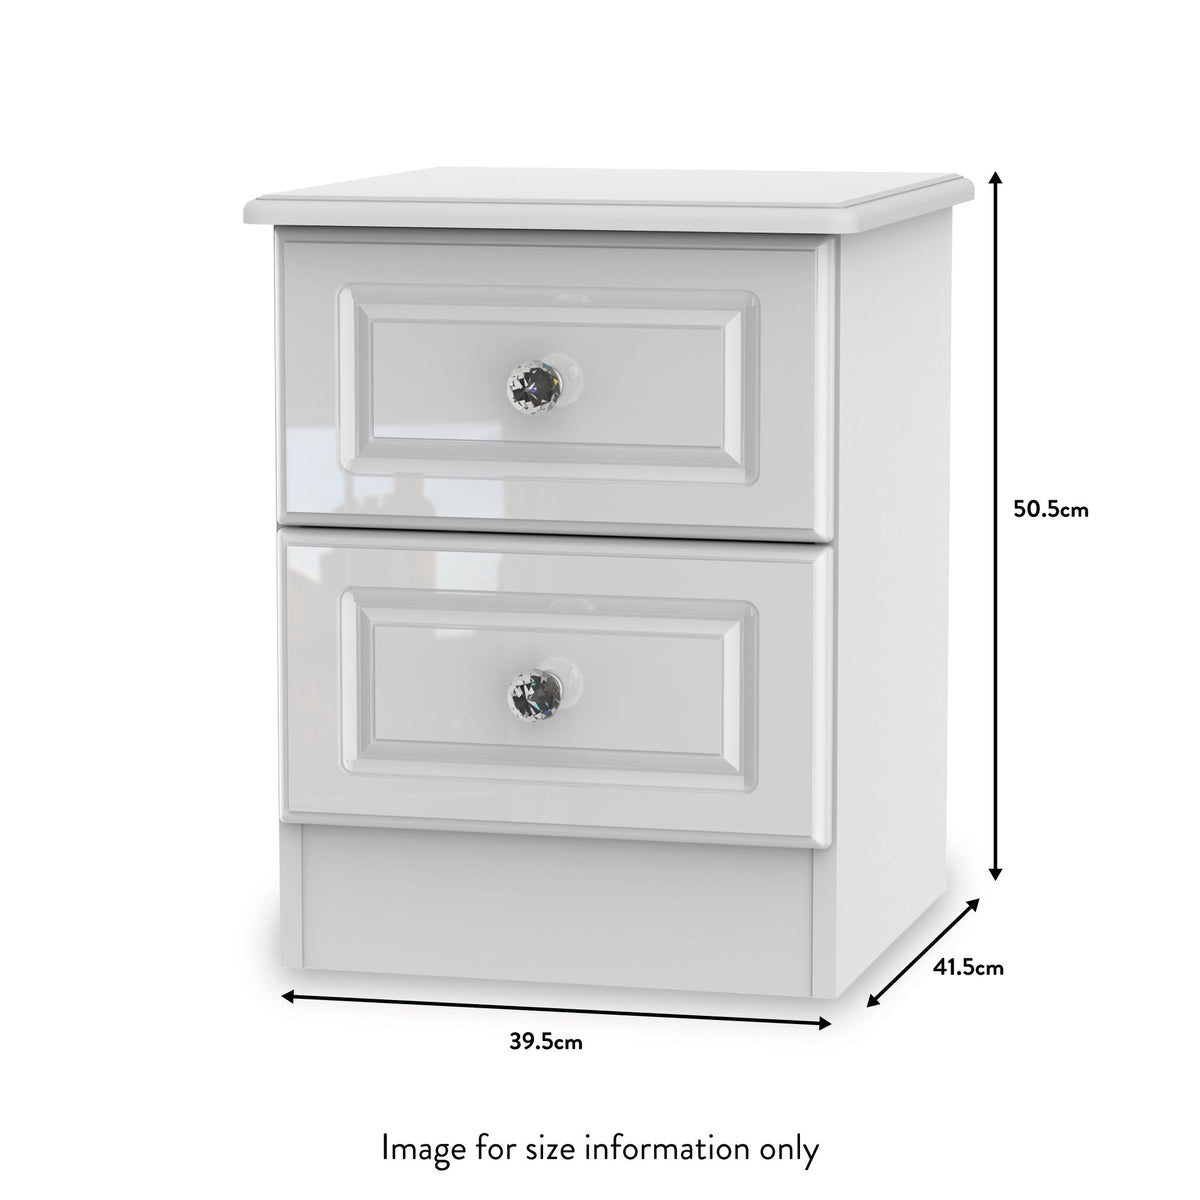 Kinsley White Gloss 3 Drawer Bedside Cabinet from Roseland size